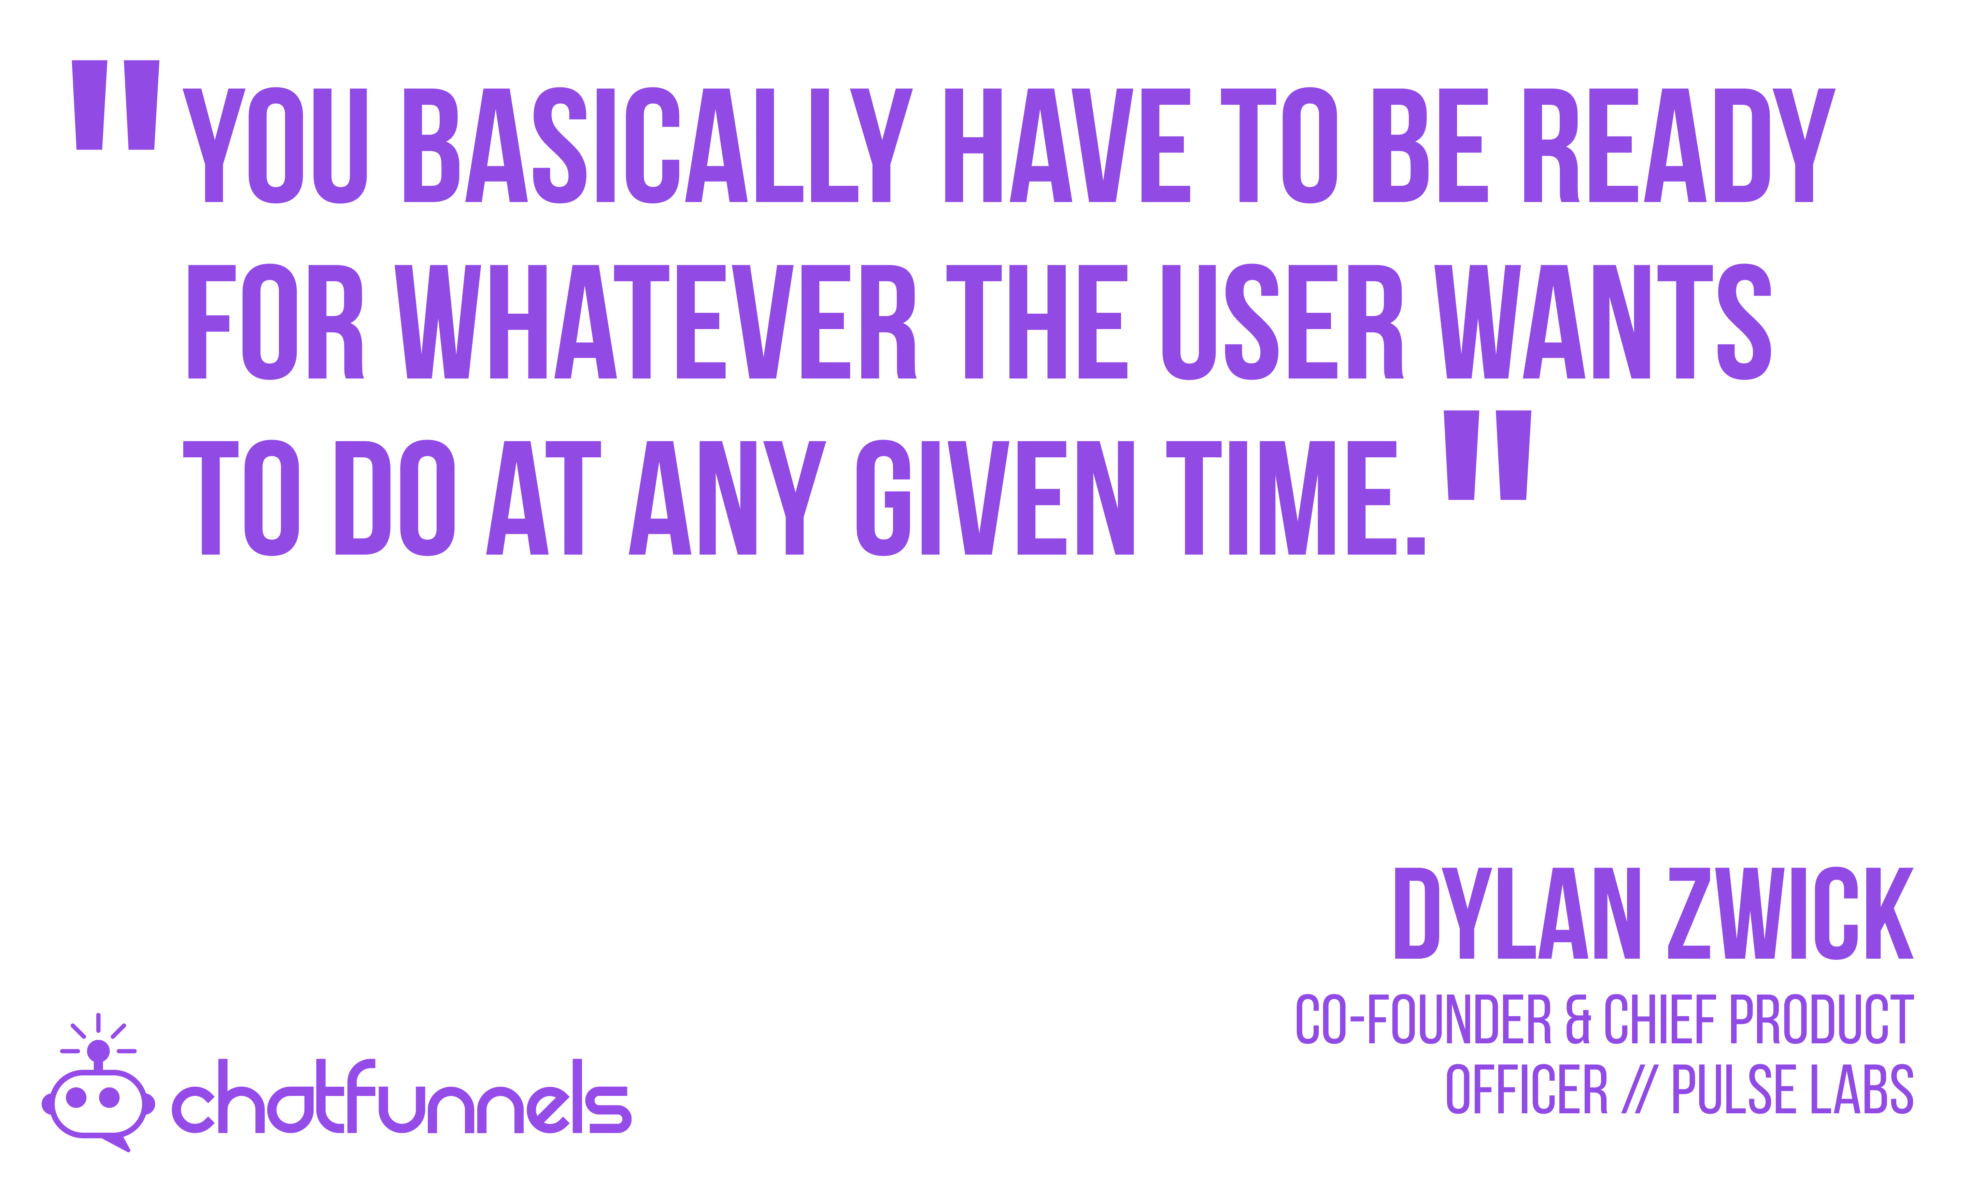 You basically have to be ready for whatever the user wants to do at any given time